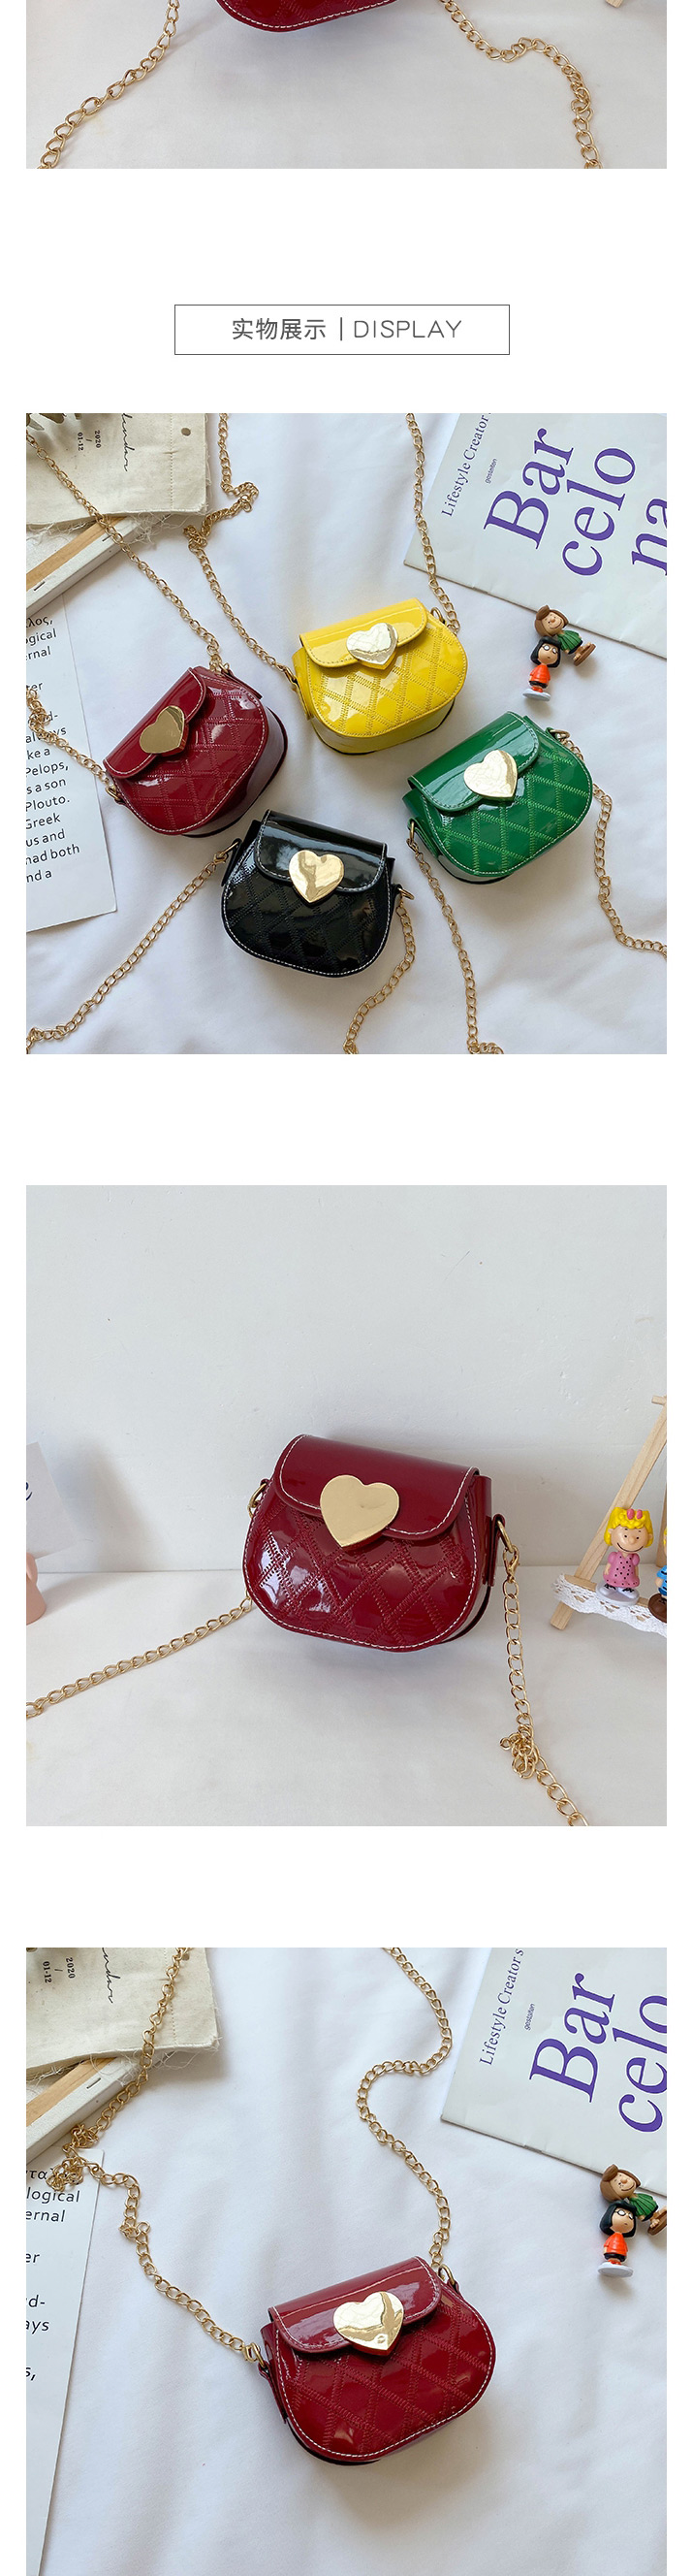 Fashion Red Childrens One-shoulder Diagonal Bag With Chain Love Lock,Shoulder bags